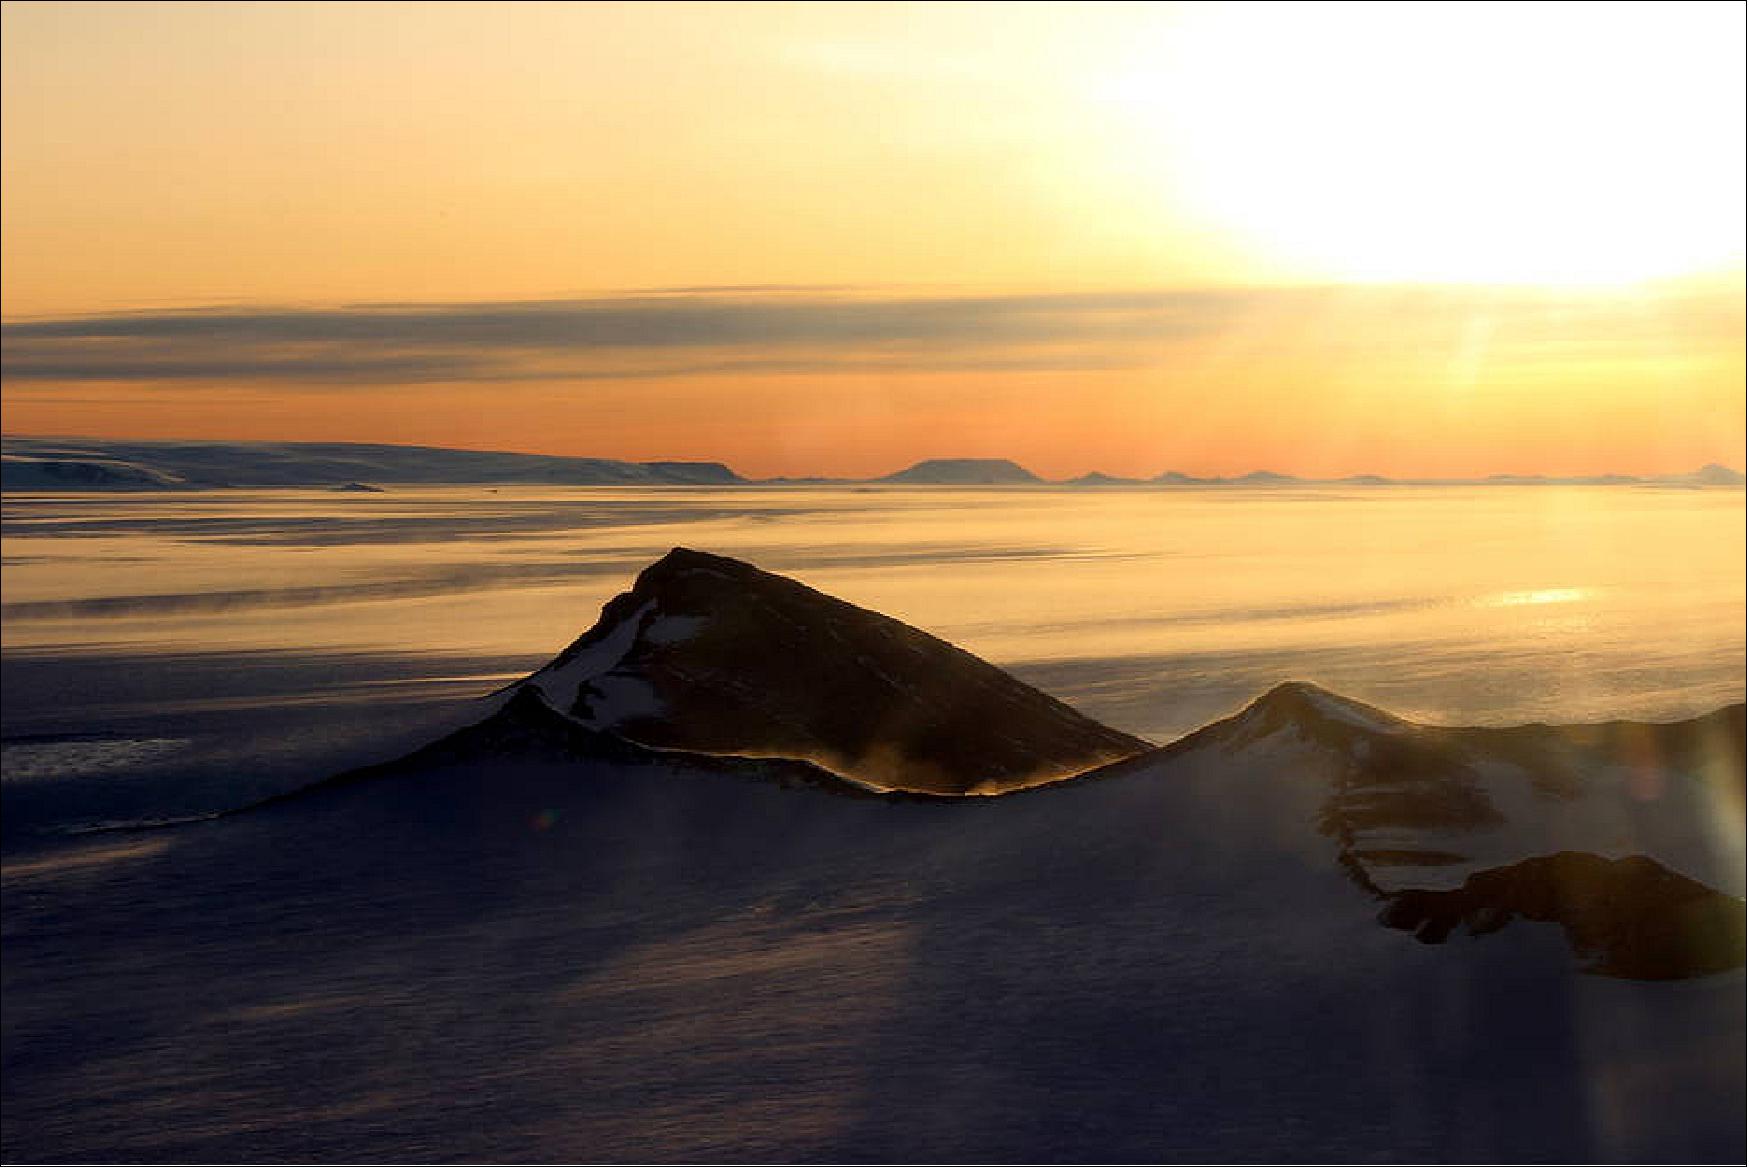 Figure 72: The Shackleton Range in Antarctica at sunset with snow blowing off the ridges, photographed during an Operation IceBridge flight on 10 October 2018 (image credits: NASA/Michael Studinger)